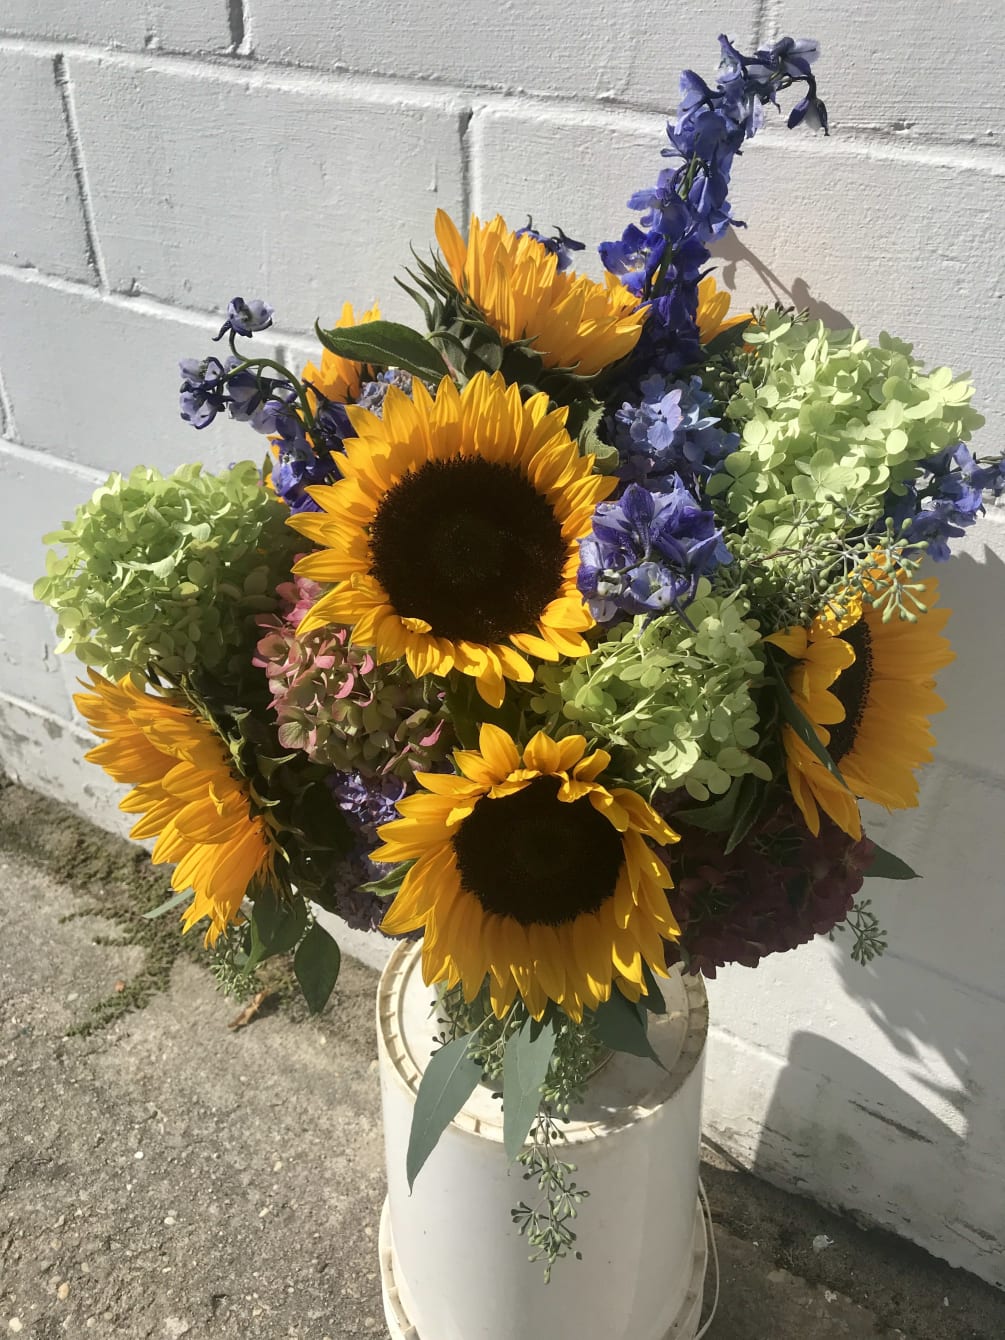 Vase arrangement with yellows blues and mixed colors 